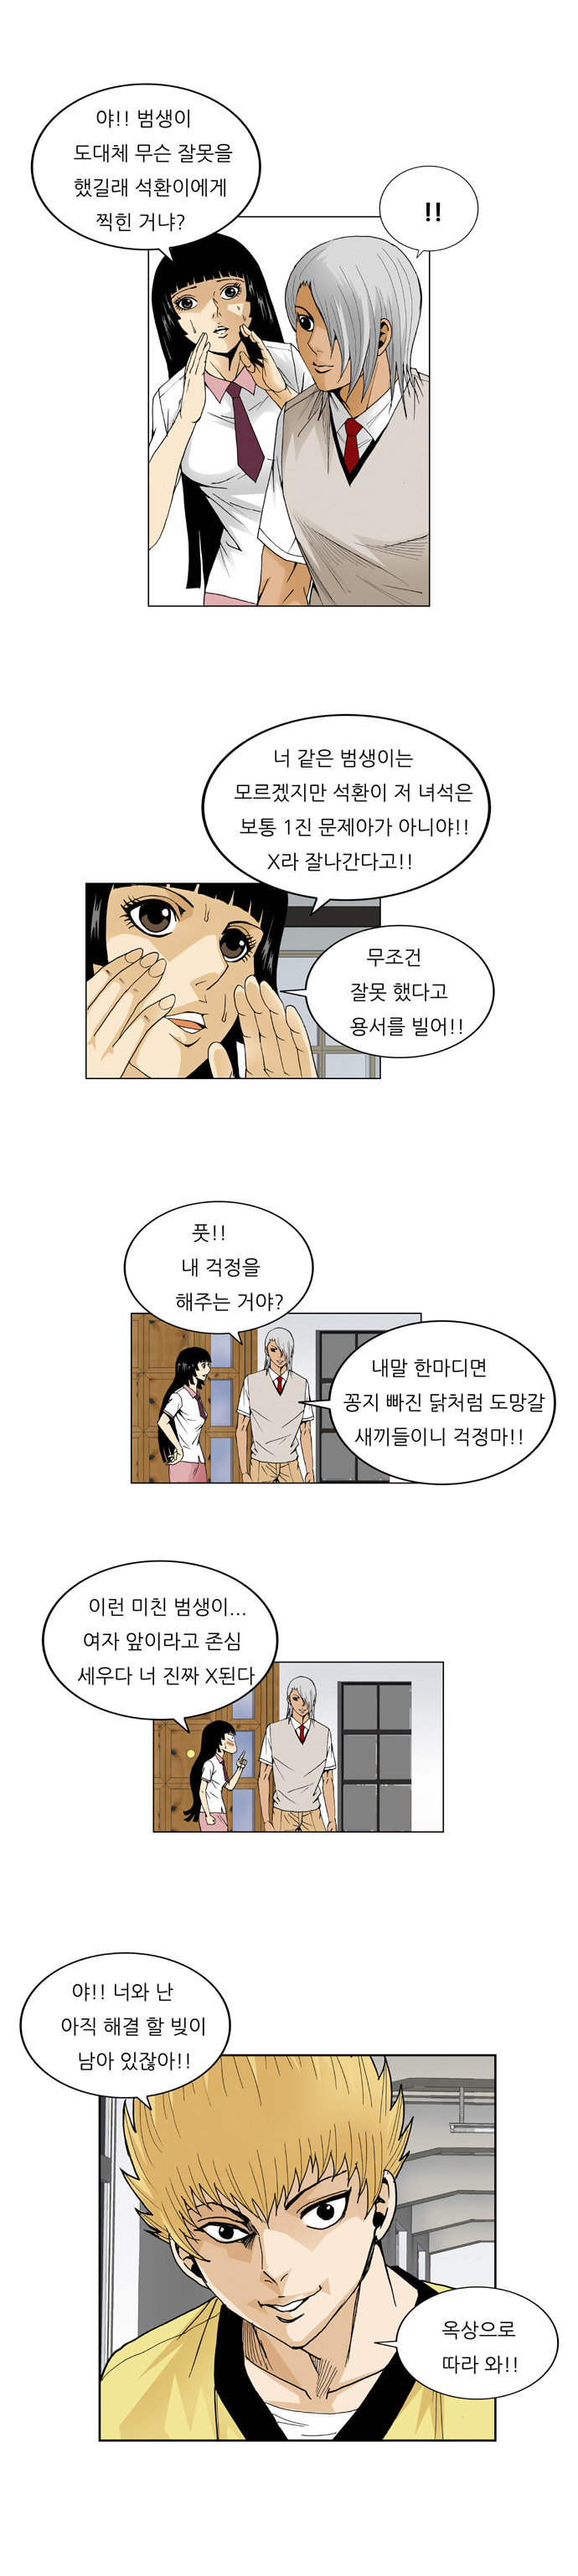 Ultimate Legend - Kang Hae Hyo - Chapter 46 - Page 3